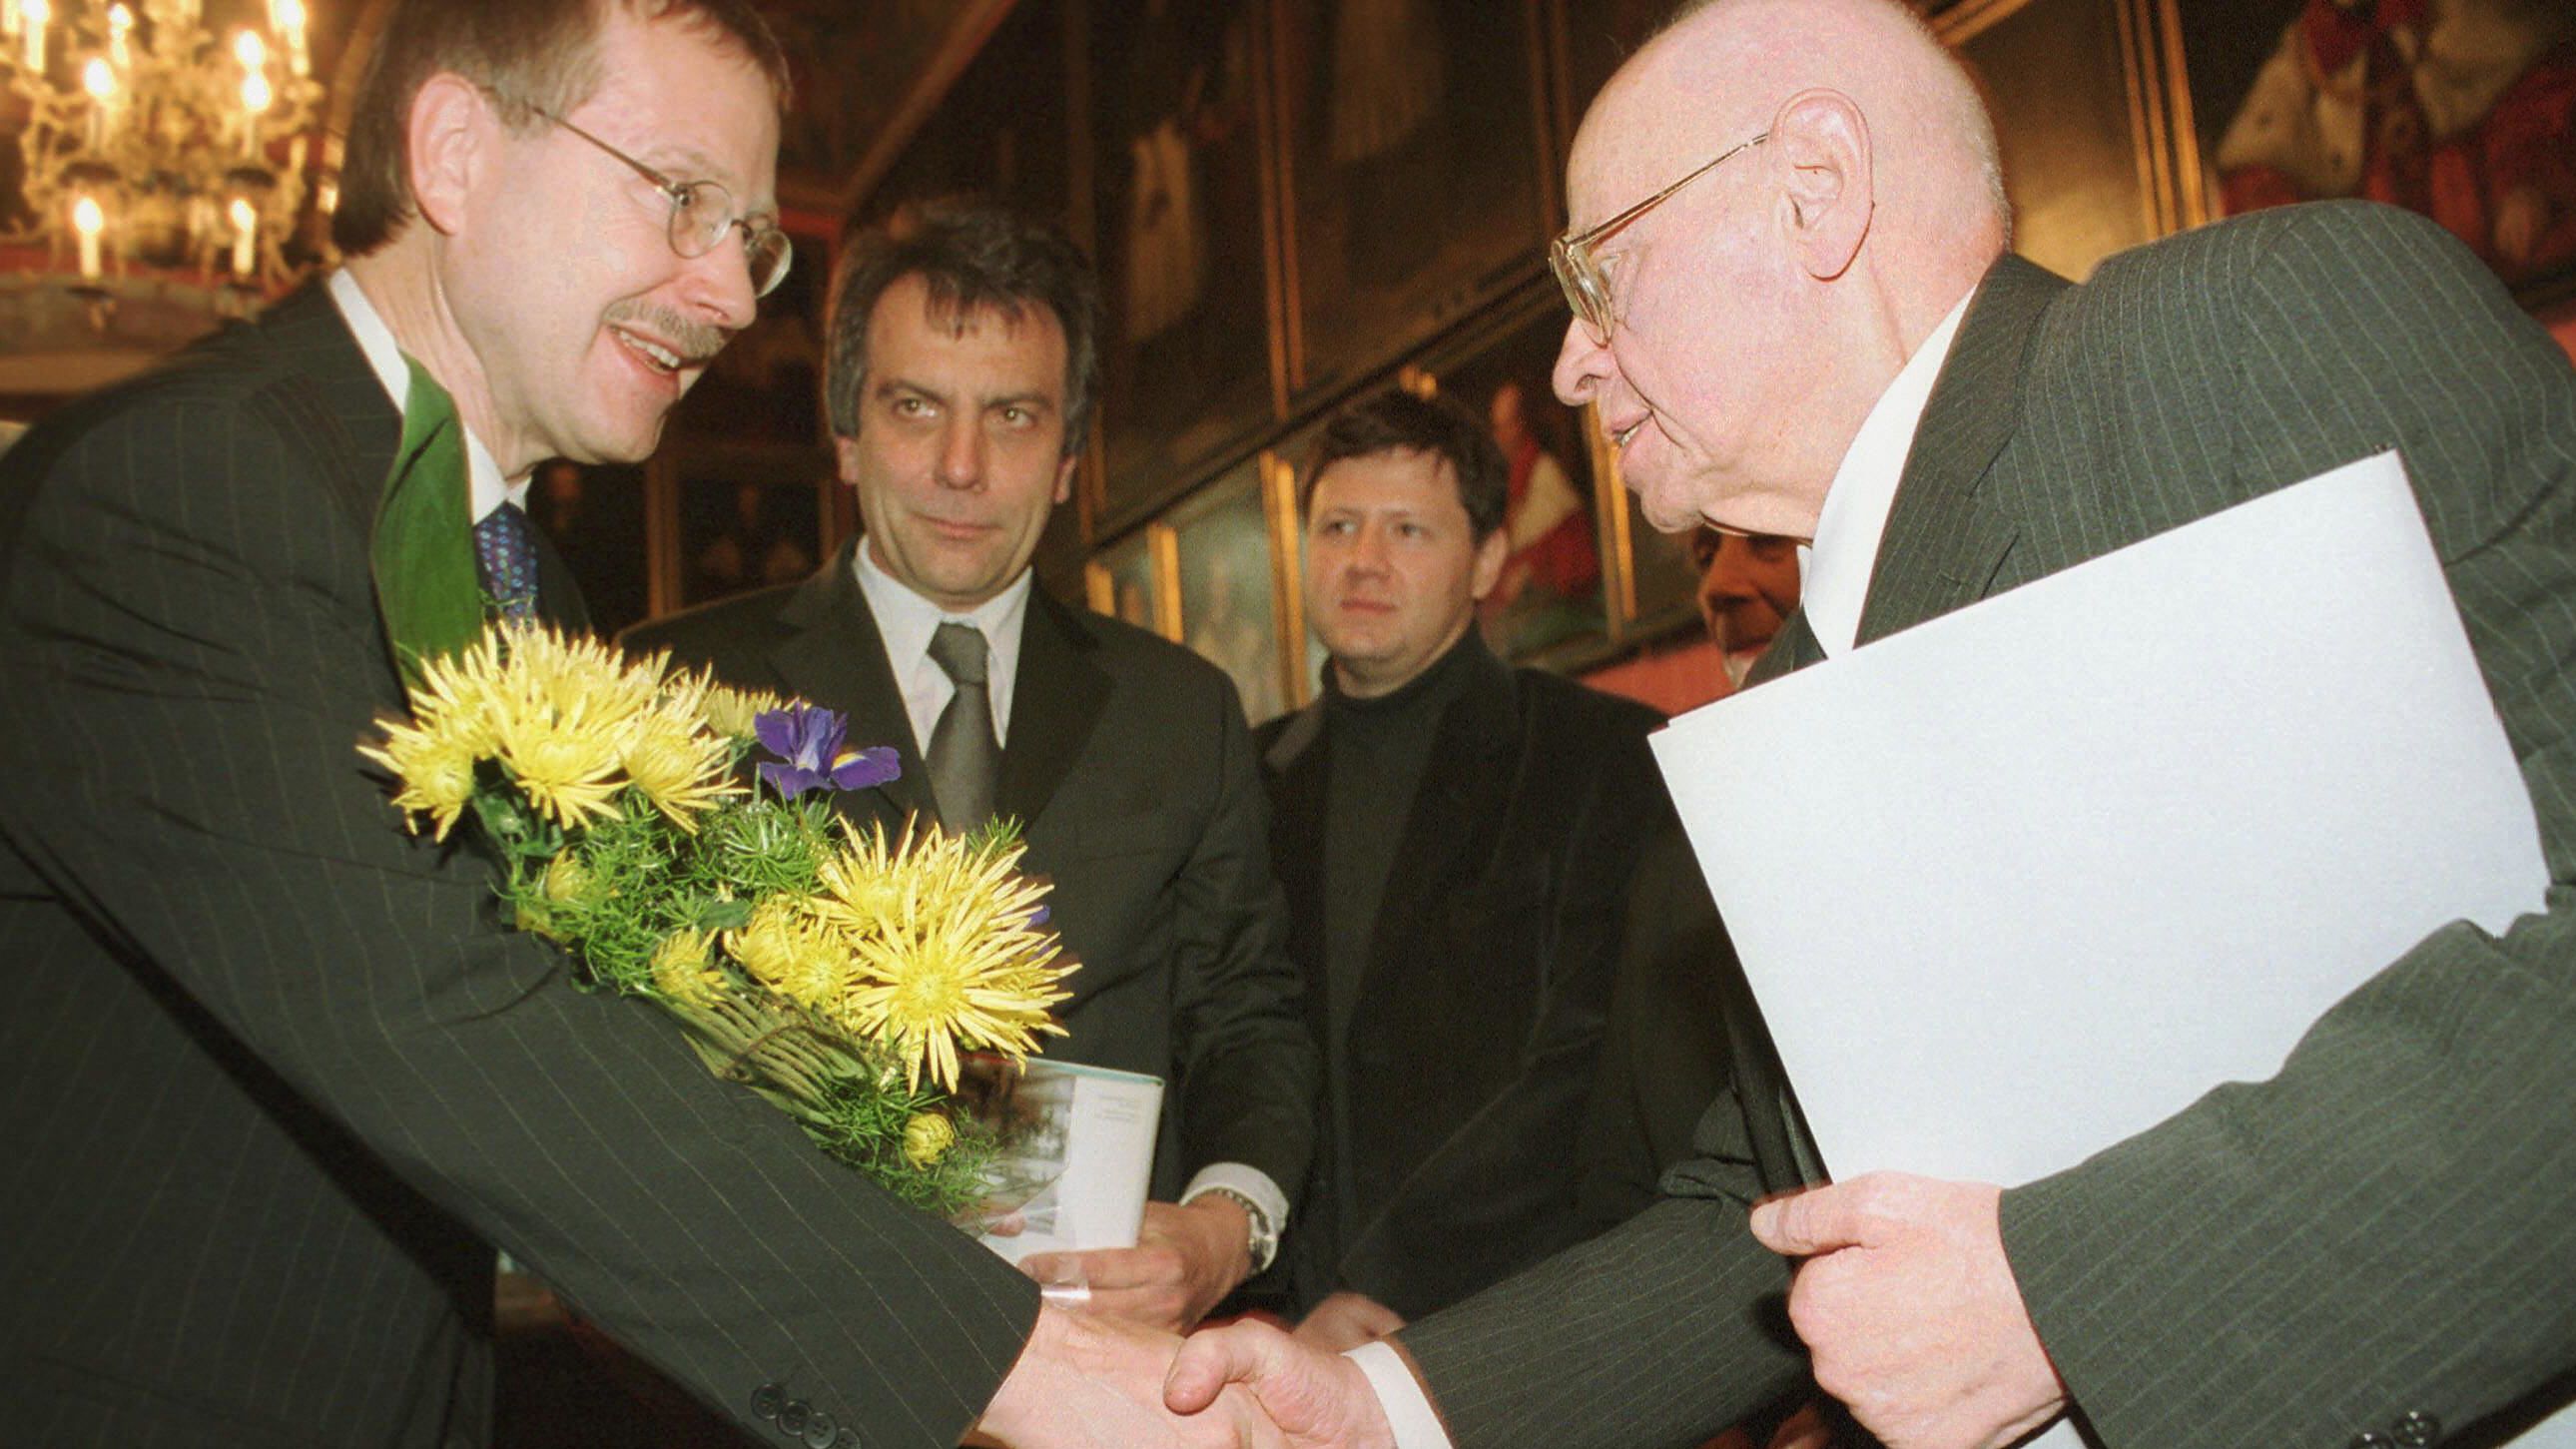 Stanislaw Lem (right) received an honorary degree from Bielefeld University.